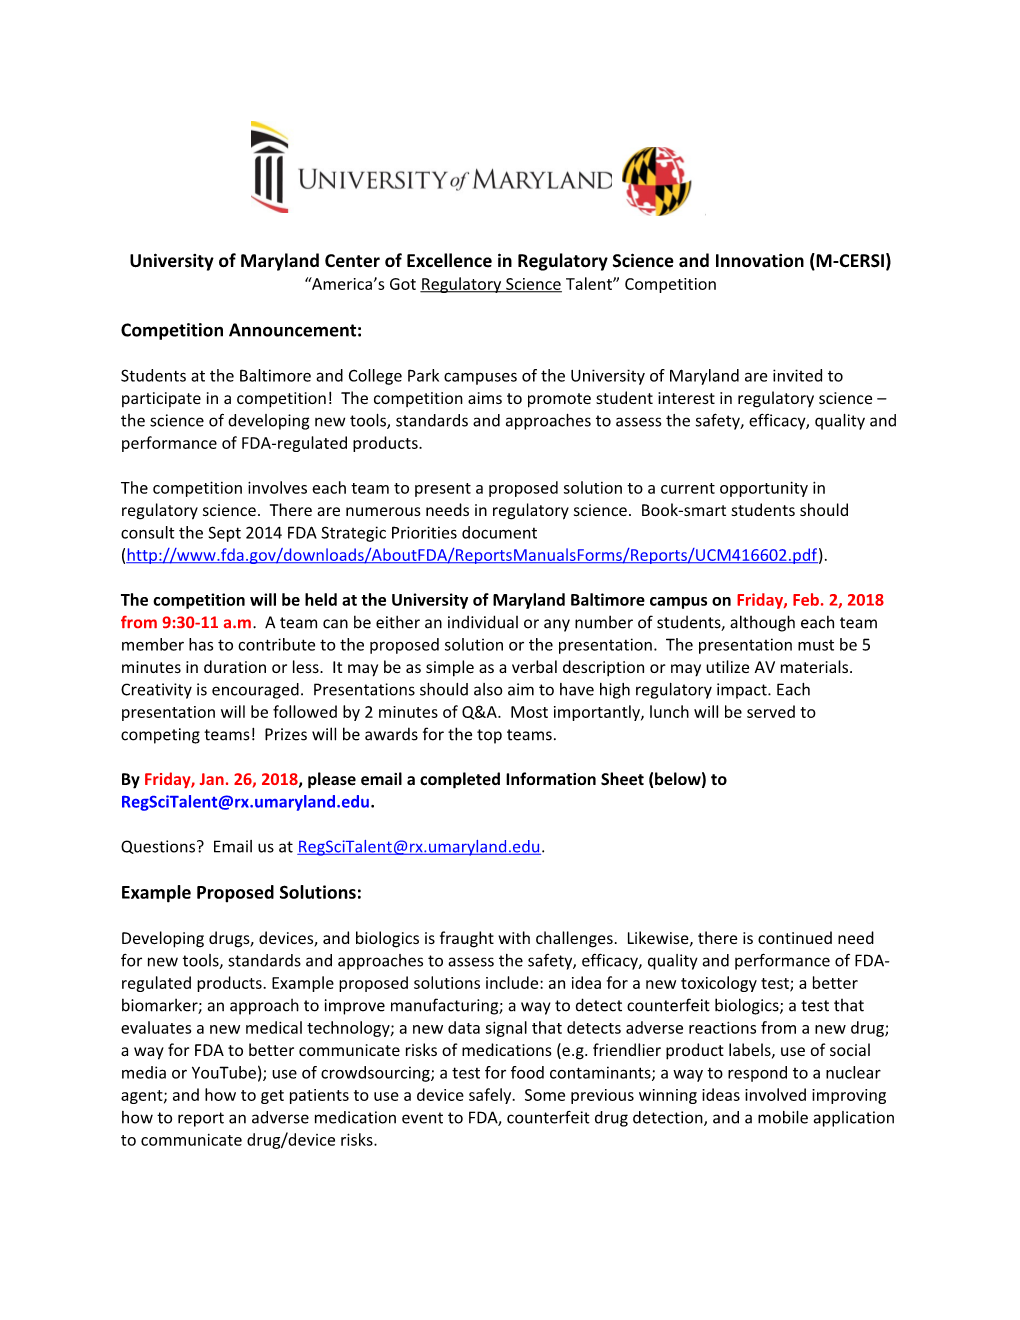 University of Maryland Center of Excellence in Regulatory Science and Innovation (M-CERSI)